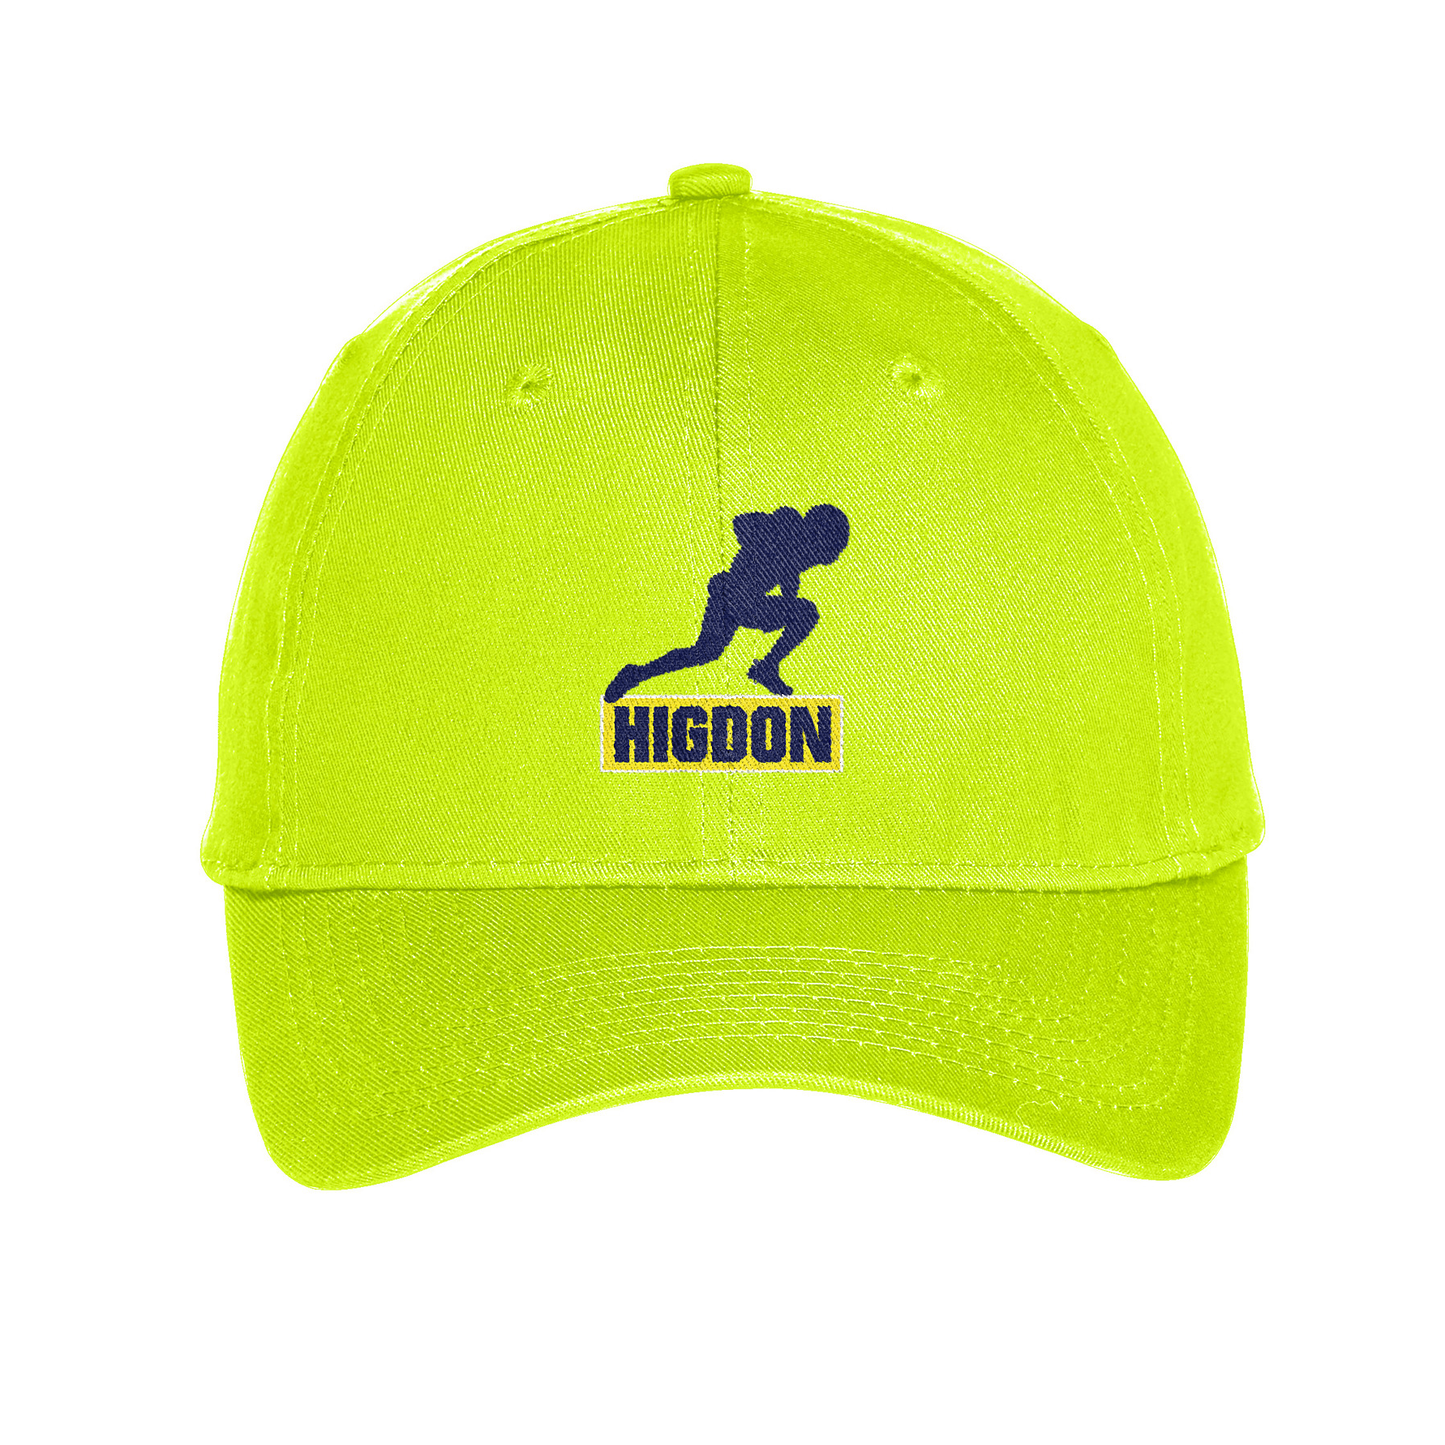 GT Higdon Embroidered Twill Cap